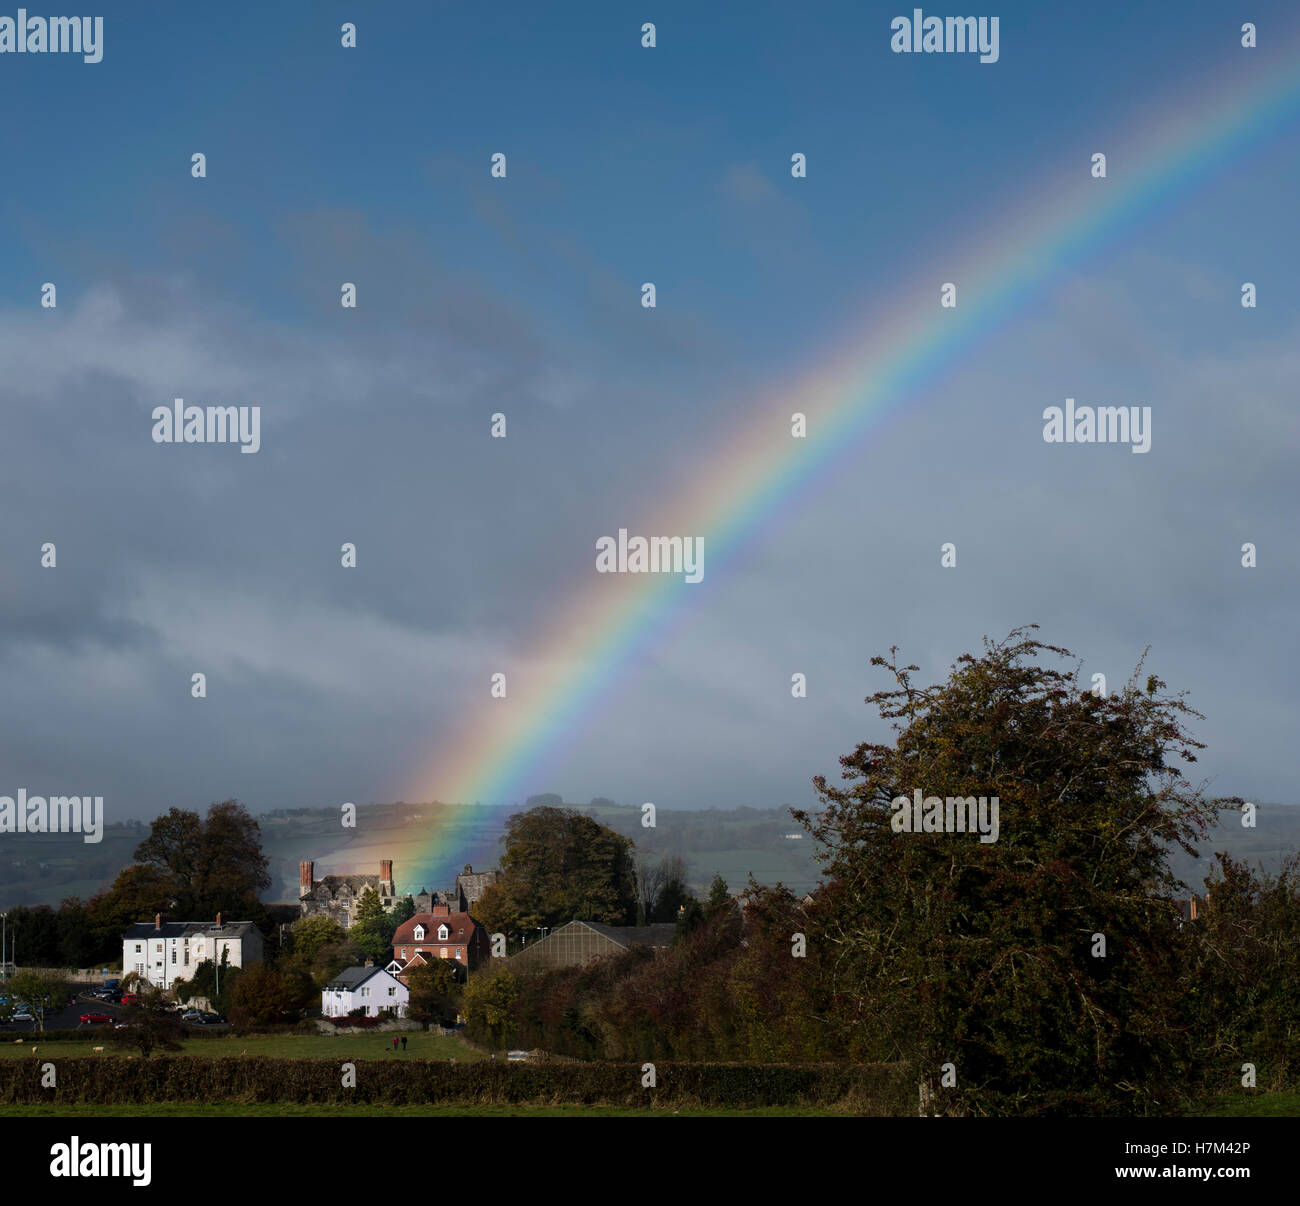 Hay-on-Wye, UK. 6th Nov, 2016. Pot of Gold for Hay-on-Wye? A rainbow ends on Hay-on-Wye castle. Hay Castle Trust was awarded lottery funding to save and restore the castle, but is seeking public donations to allow work to begin in 2017. Credit:  Steven H Jones/Alamy Live News Stock Photo